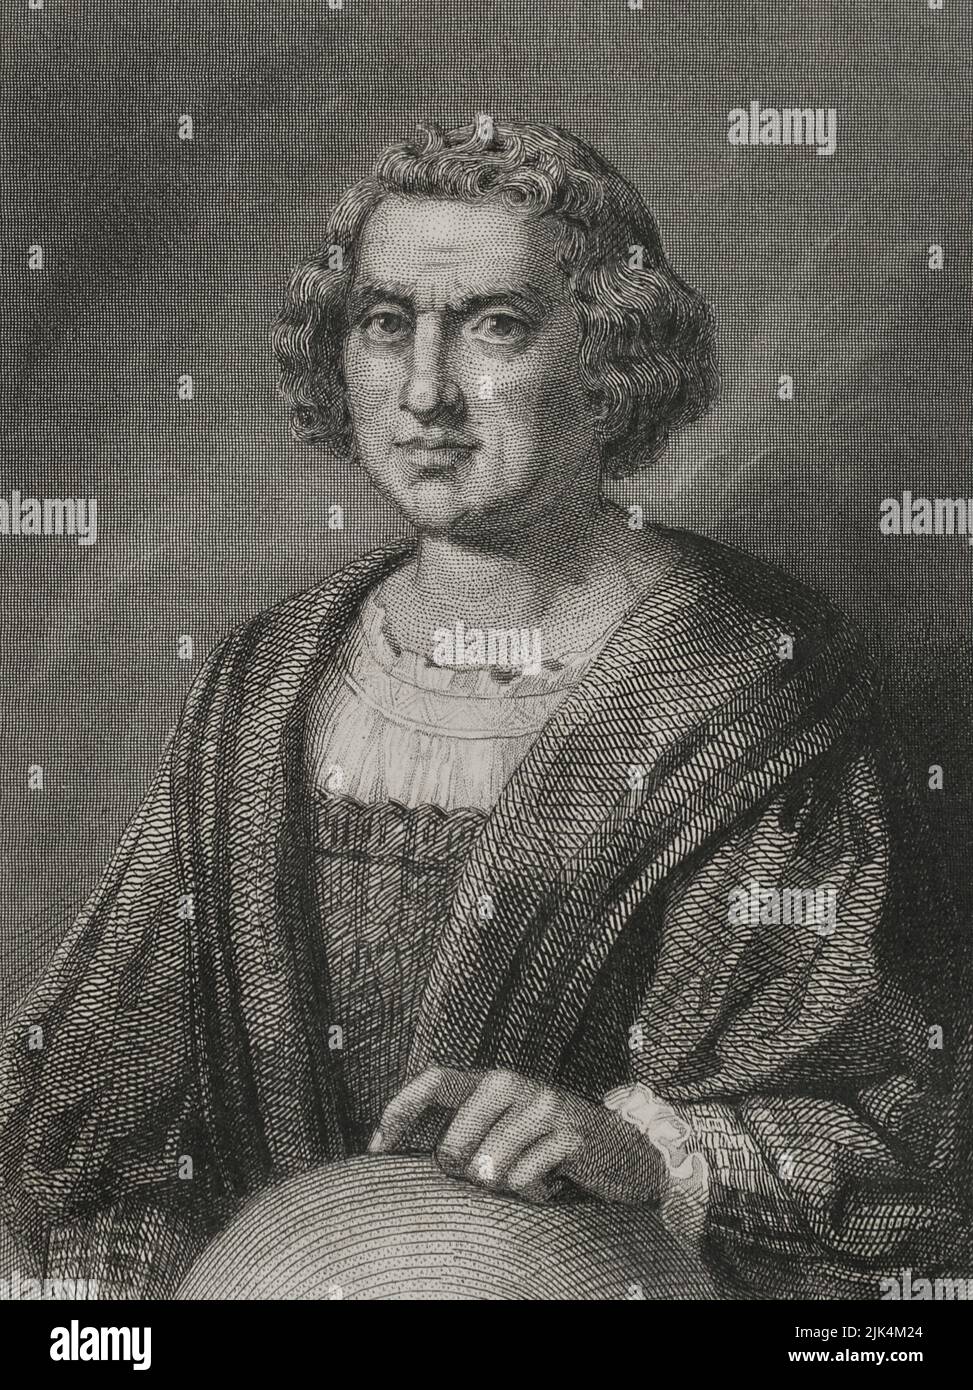 Christopher Columbus (1451-1506). Navigator, cartographer and admiral. He served the Crown of Castile. Discoverer of America in 1492. Portrait. Engraving by Geoffroy. 'Historia Universal', by César Cantú. Volume IV, 1856. Stock Photo